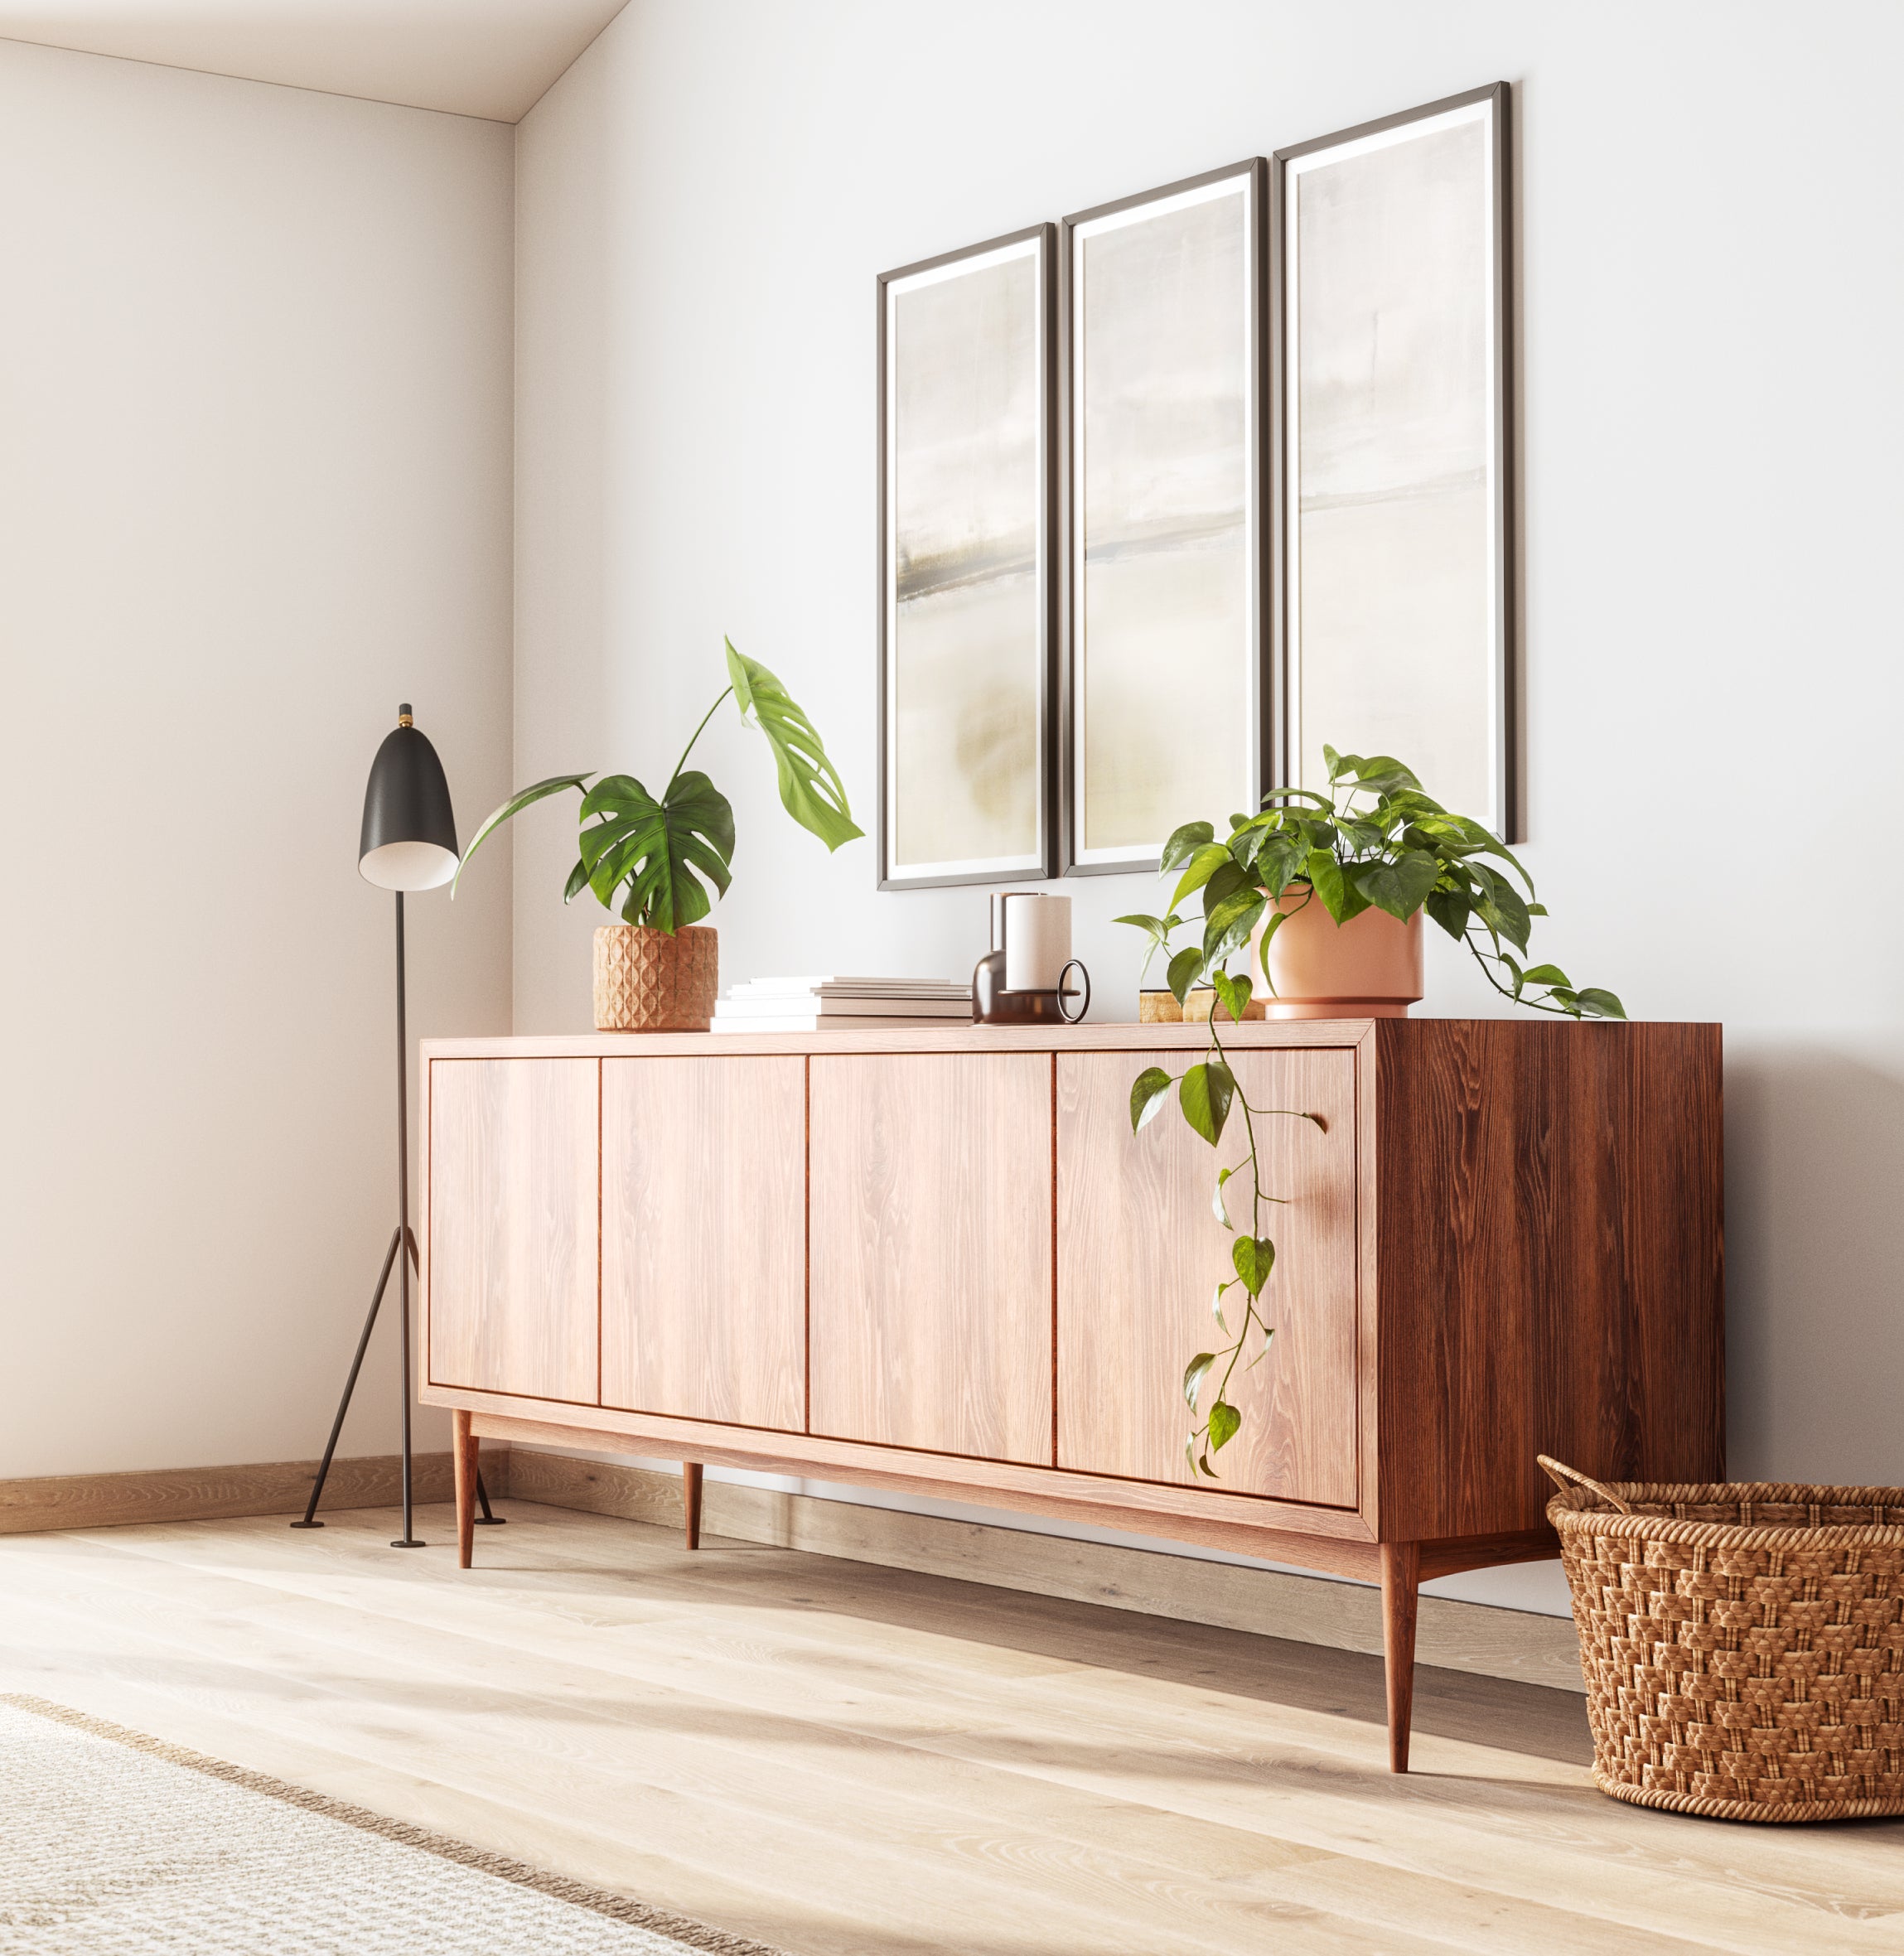 Emilia 4-door credenza in walnut with plants and baskets